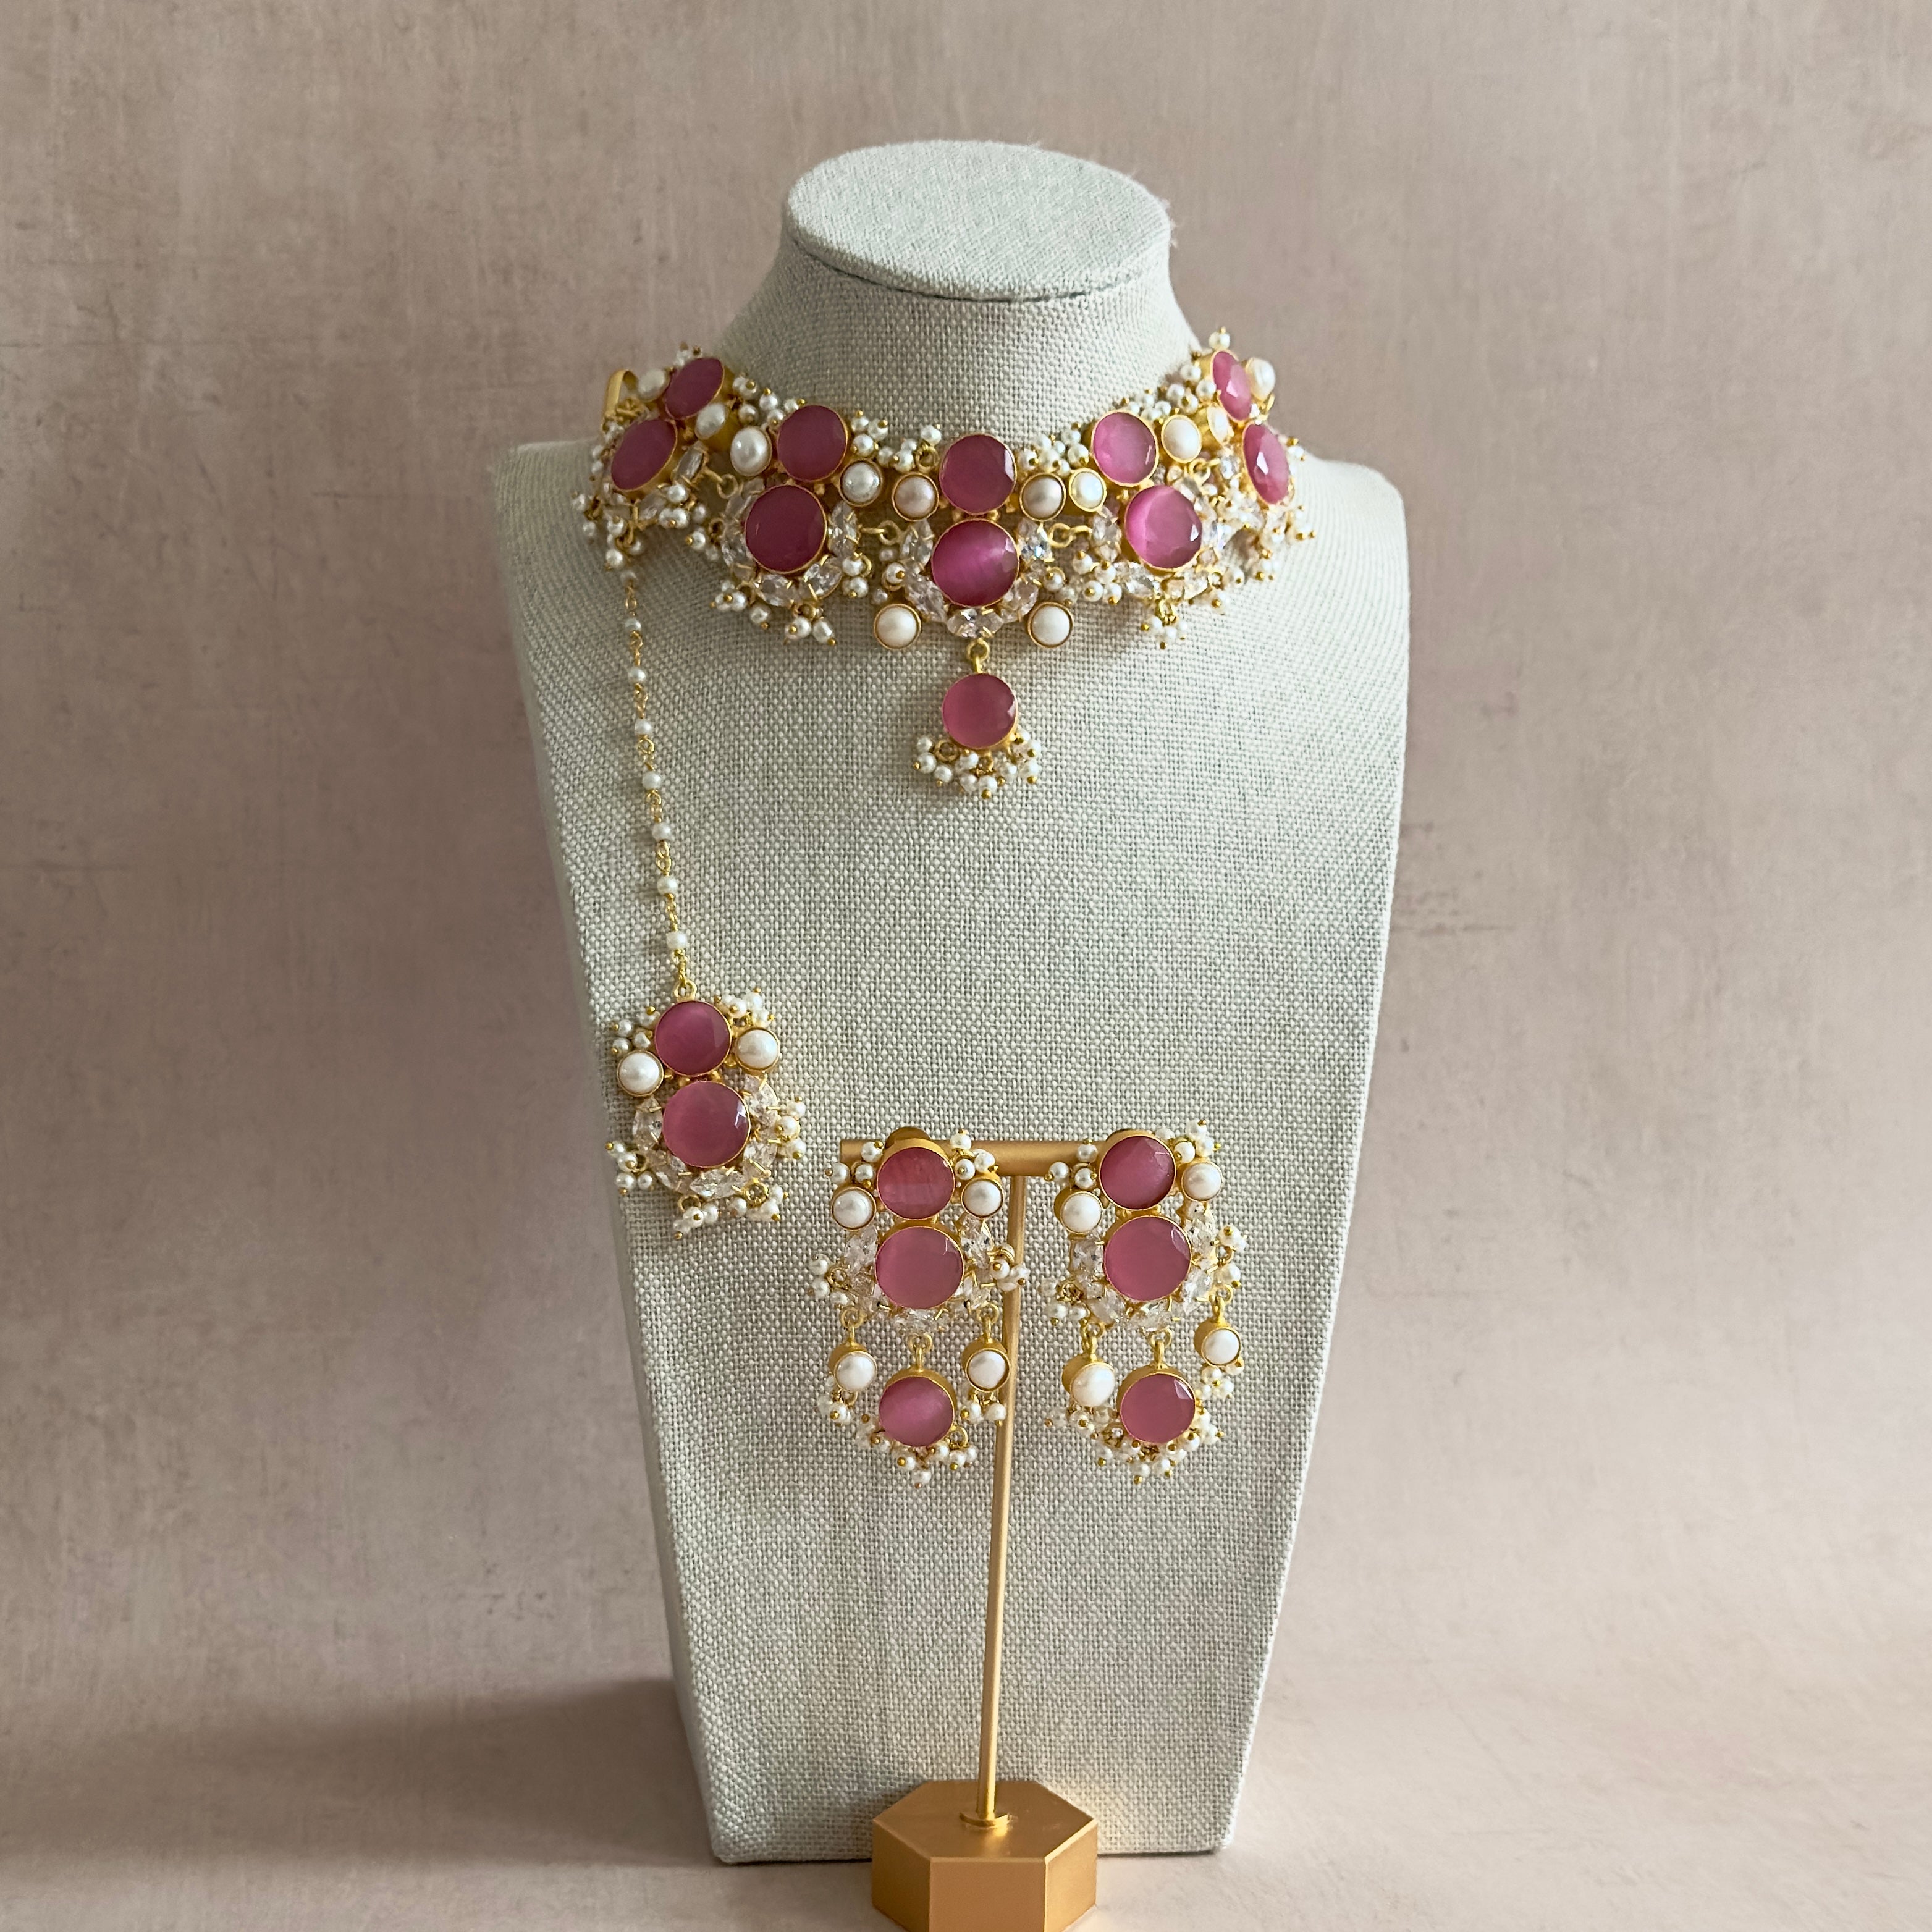 Elevate your style with our Havana Pink Choker Set! This stunning statement set features pink stones, sparkling CZ crystals, and delicate pearl accents. Complete with matching earrings and tikka, this set will add an elegant touch to any outfit. Stand out and make a statement with this must-have accessory!